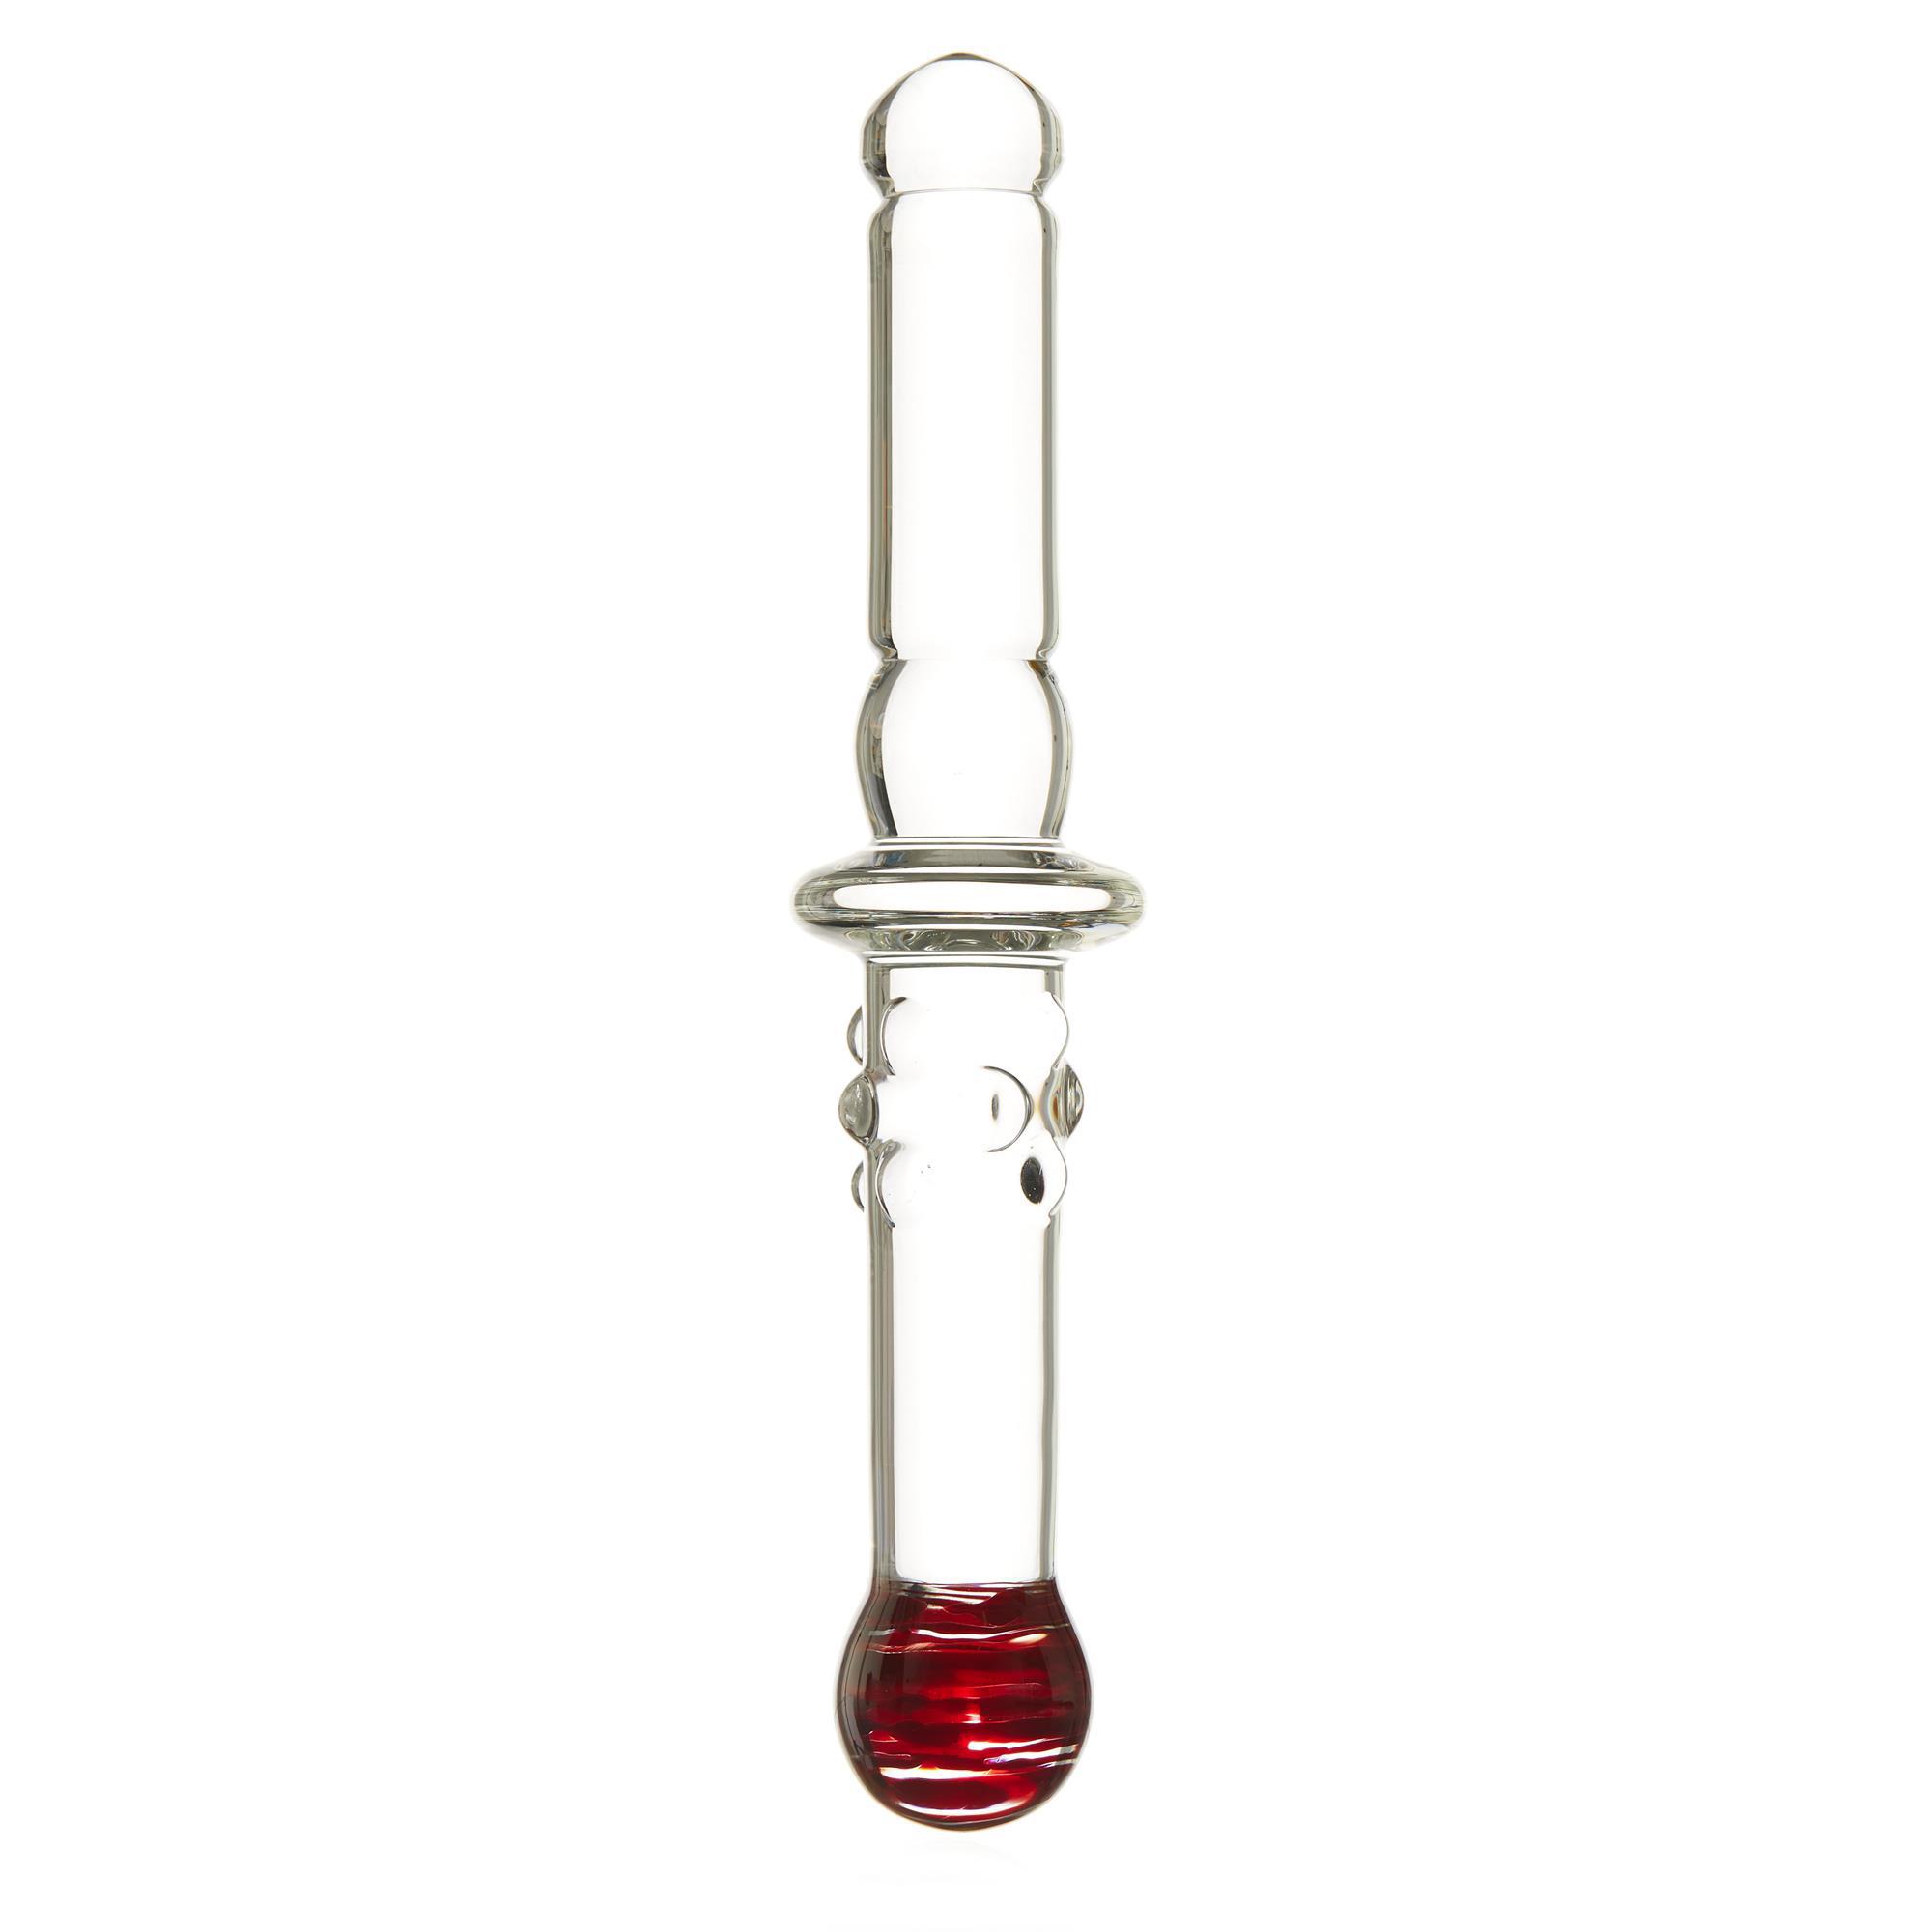 THE PIPER DOUBLE-SIDED GLASS DILDO